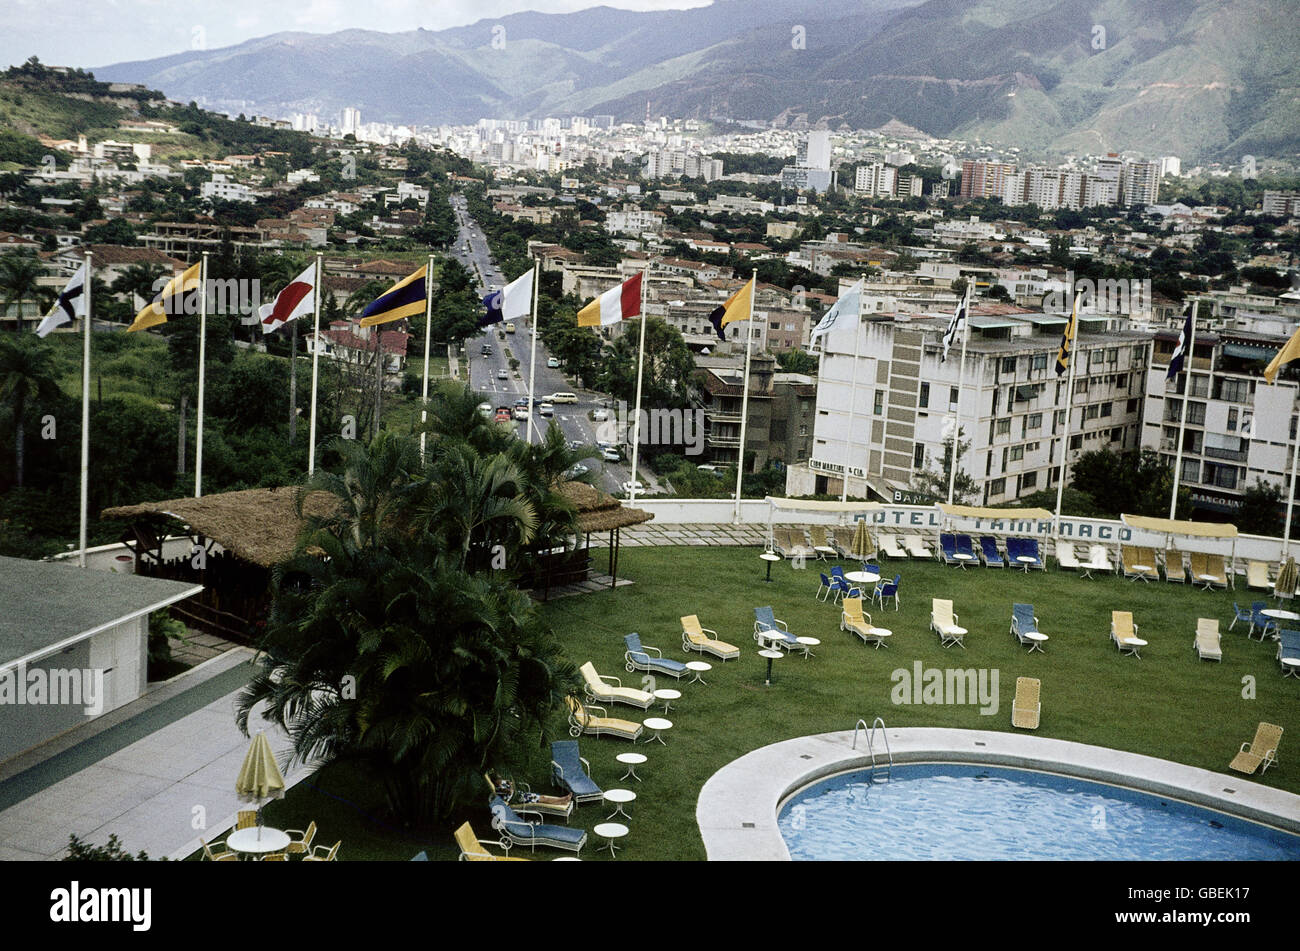 Geographie / Reisen, Venezuela, Caracas, Stadtblick mit Hotel Tamanaco, 1964, Additional-Rights-Clearences-not available Stockfoto